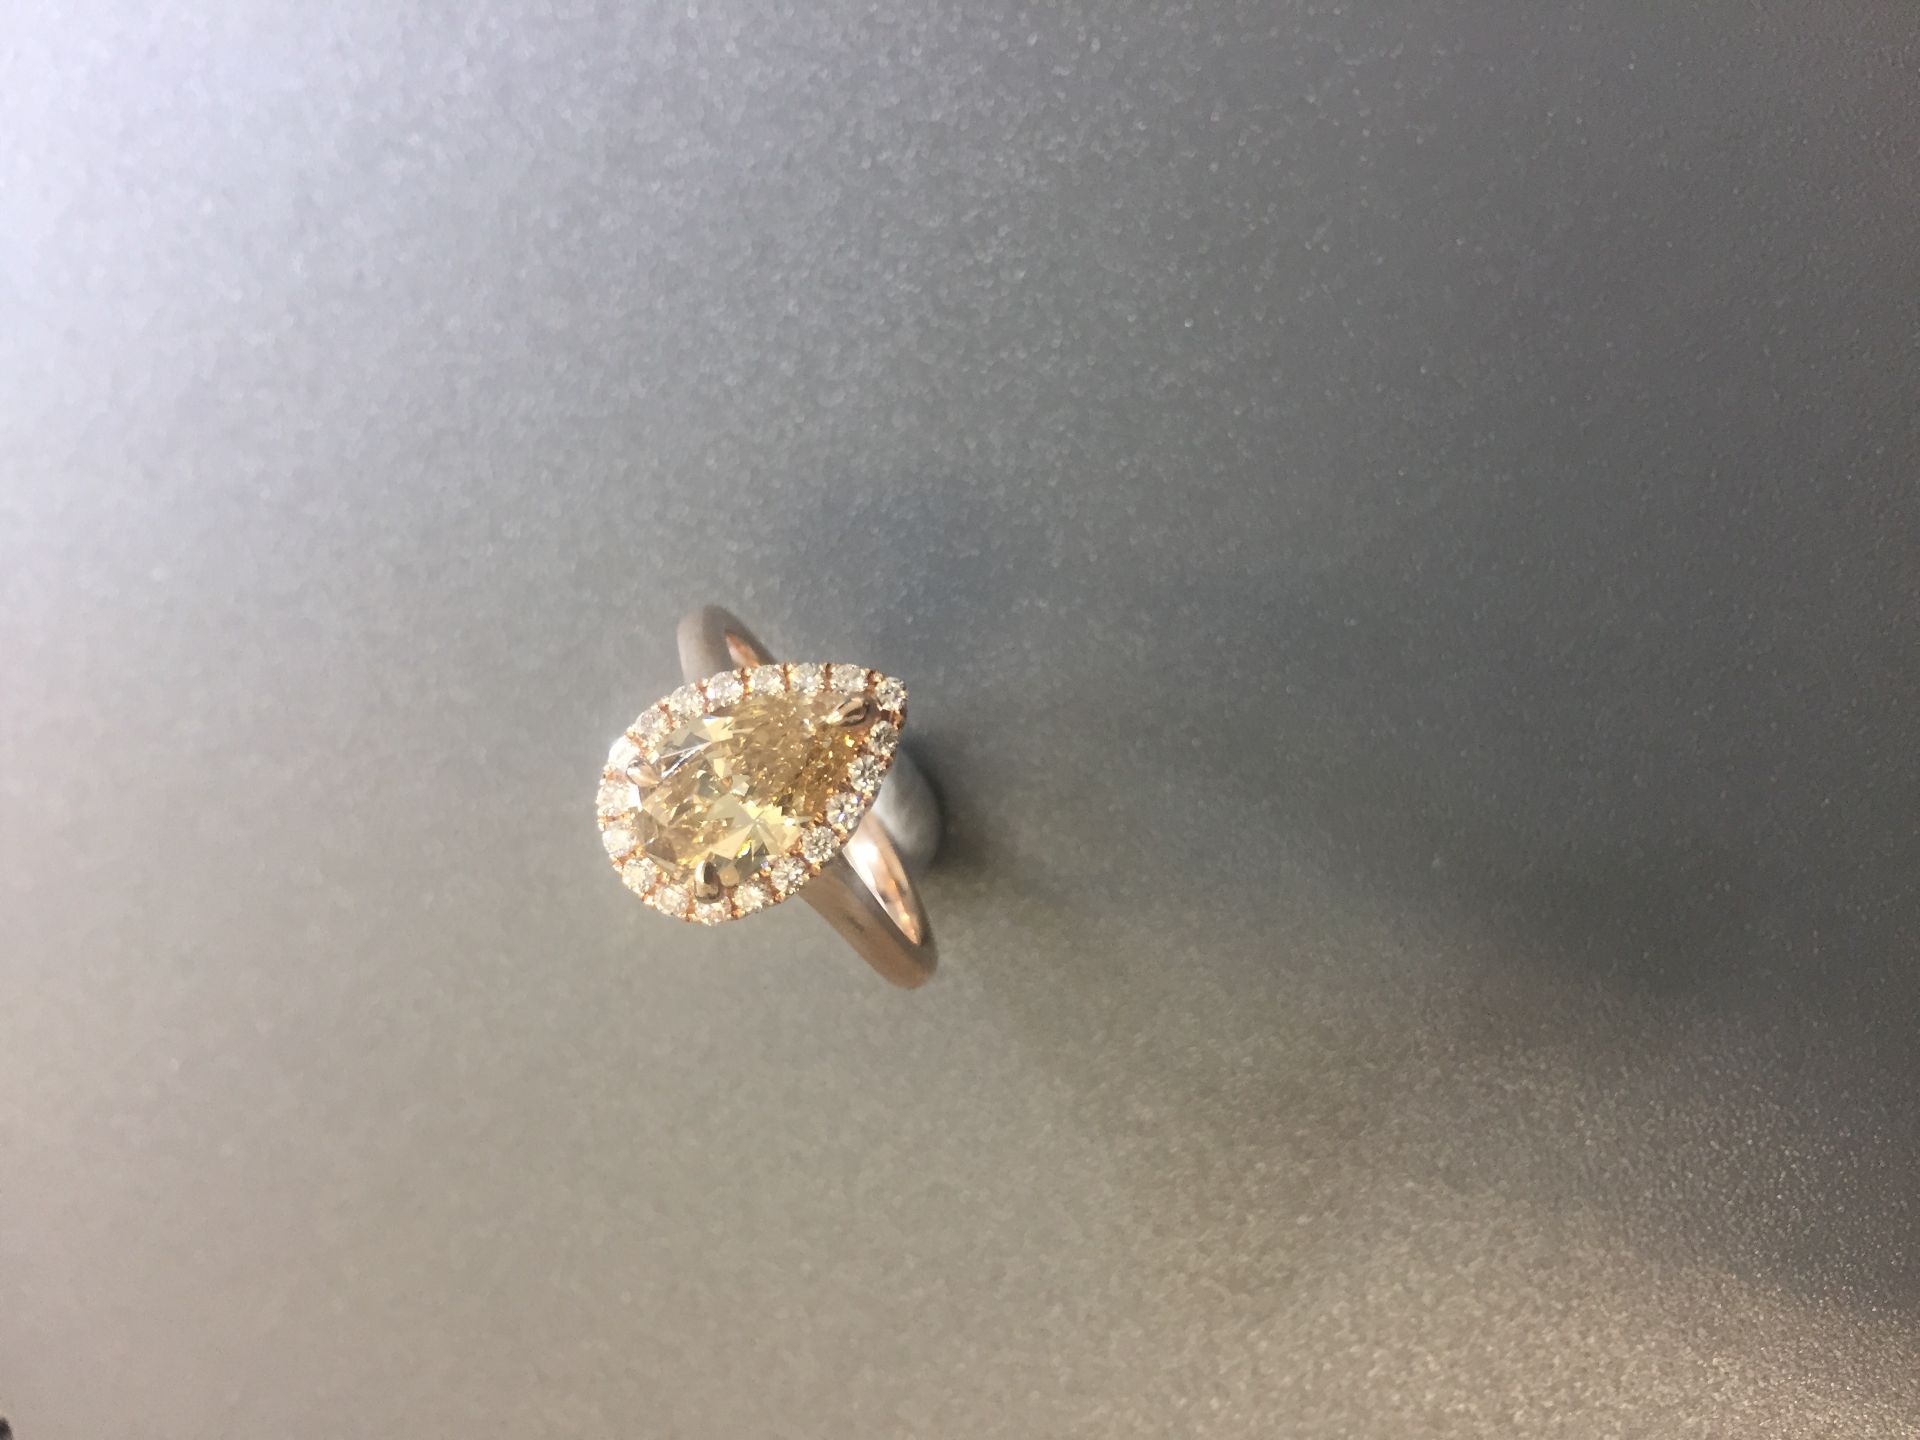 1.47ct pear shaped diamond set ring. Fancy yellow pear diamond, I1 clarity. Set in 18ct rose gold.